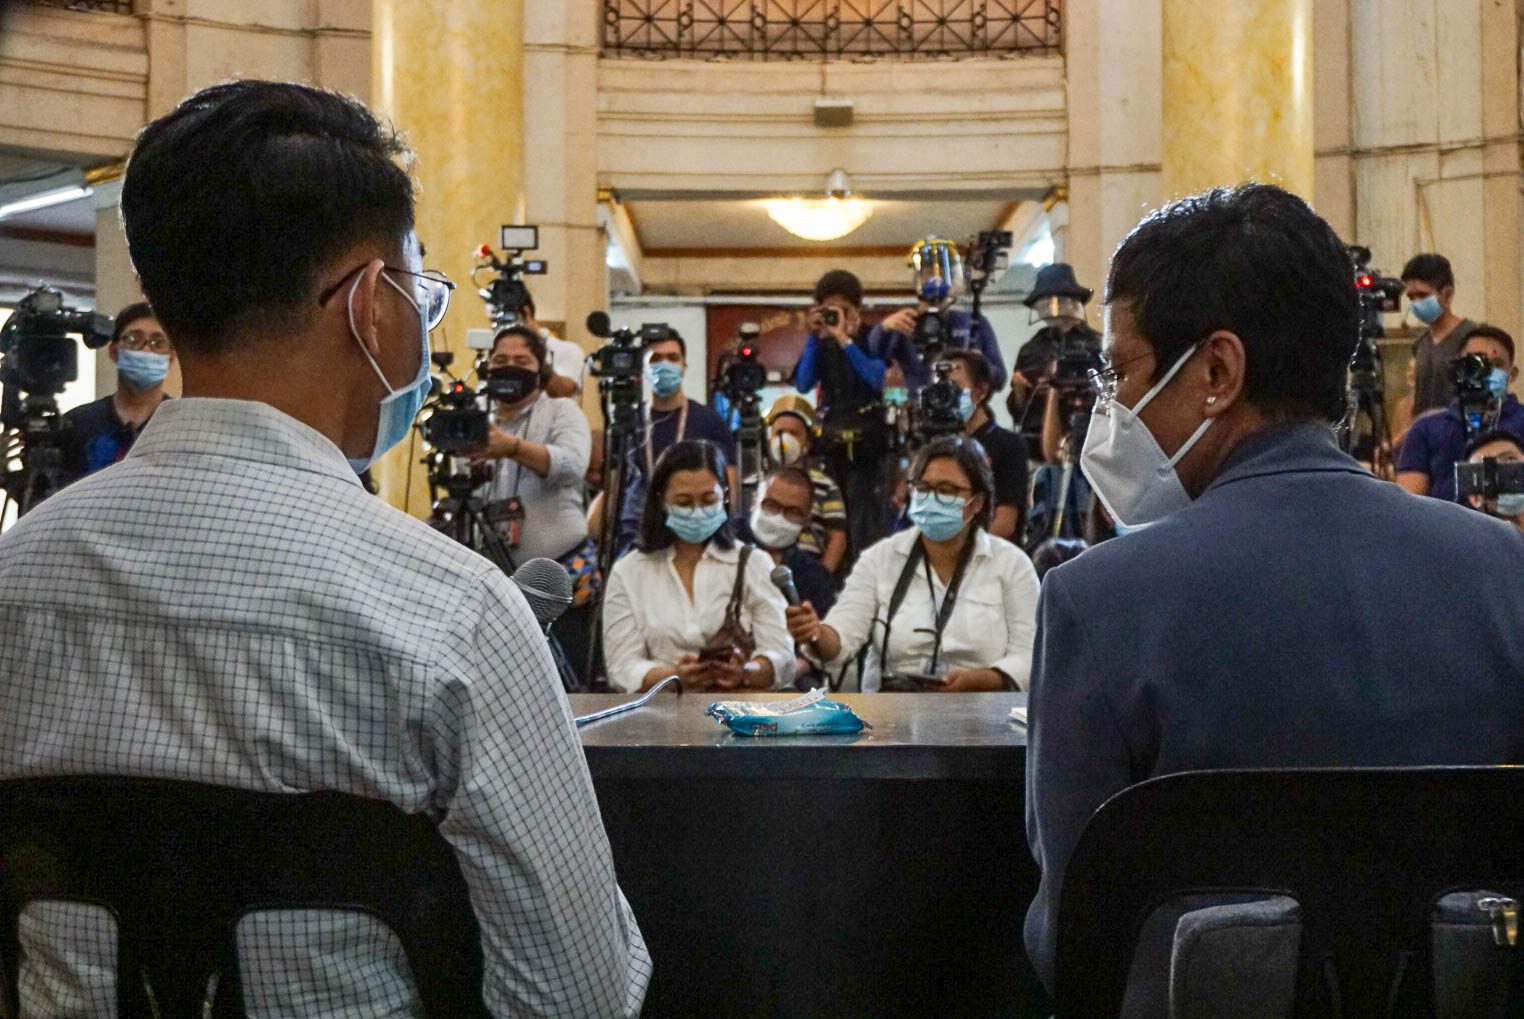 CYBER LIBEL CASE. Rappler CEO Maria Ressa and former researcher-writer Reynaldo Santos Jr face the media after they are convicted of cyber libel on June 15, 2020. Photo by Dante Diosina Jr/Rappler 